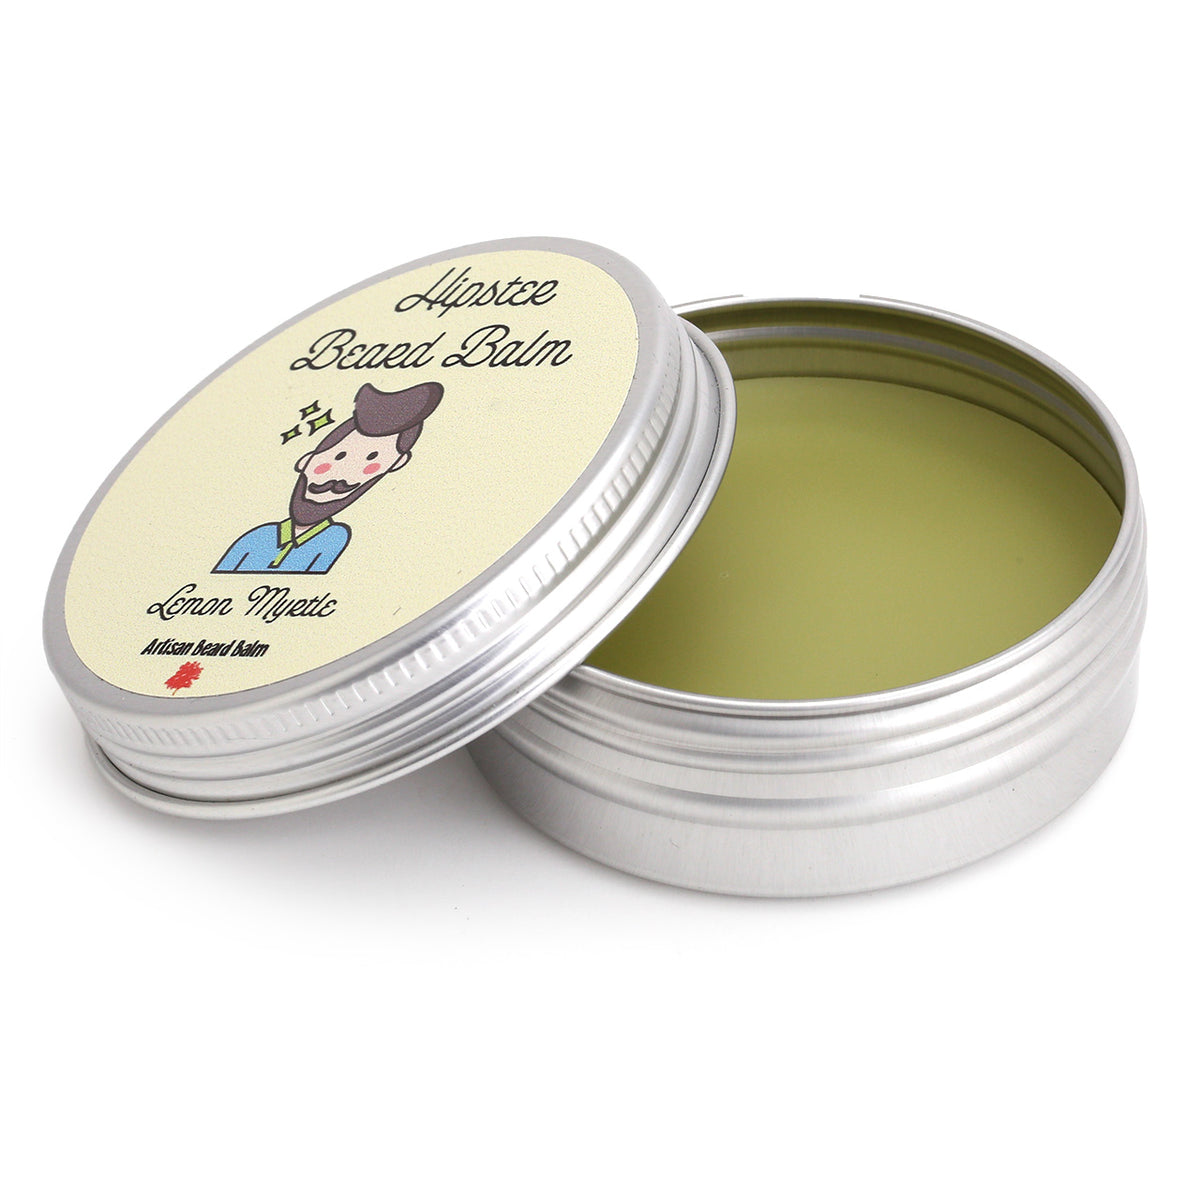    Whispers from The Woods Beard Balm - Lemon Myrtle, showing inside the tin